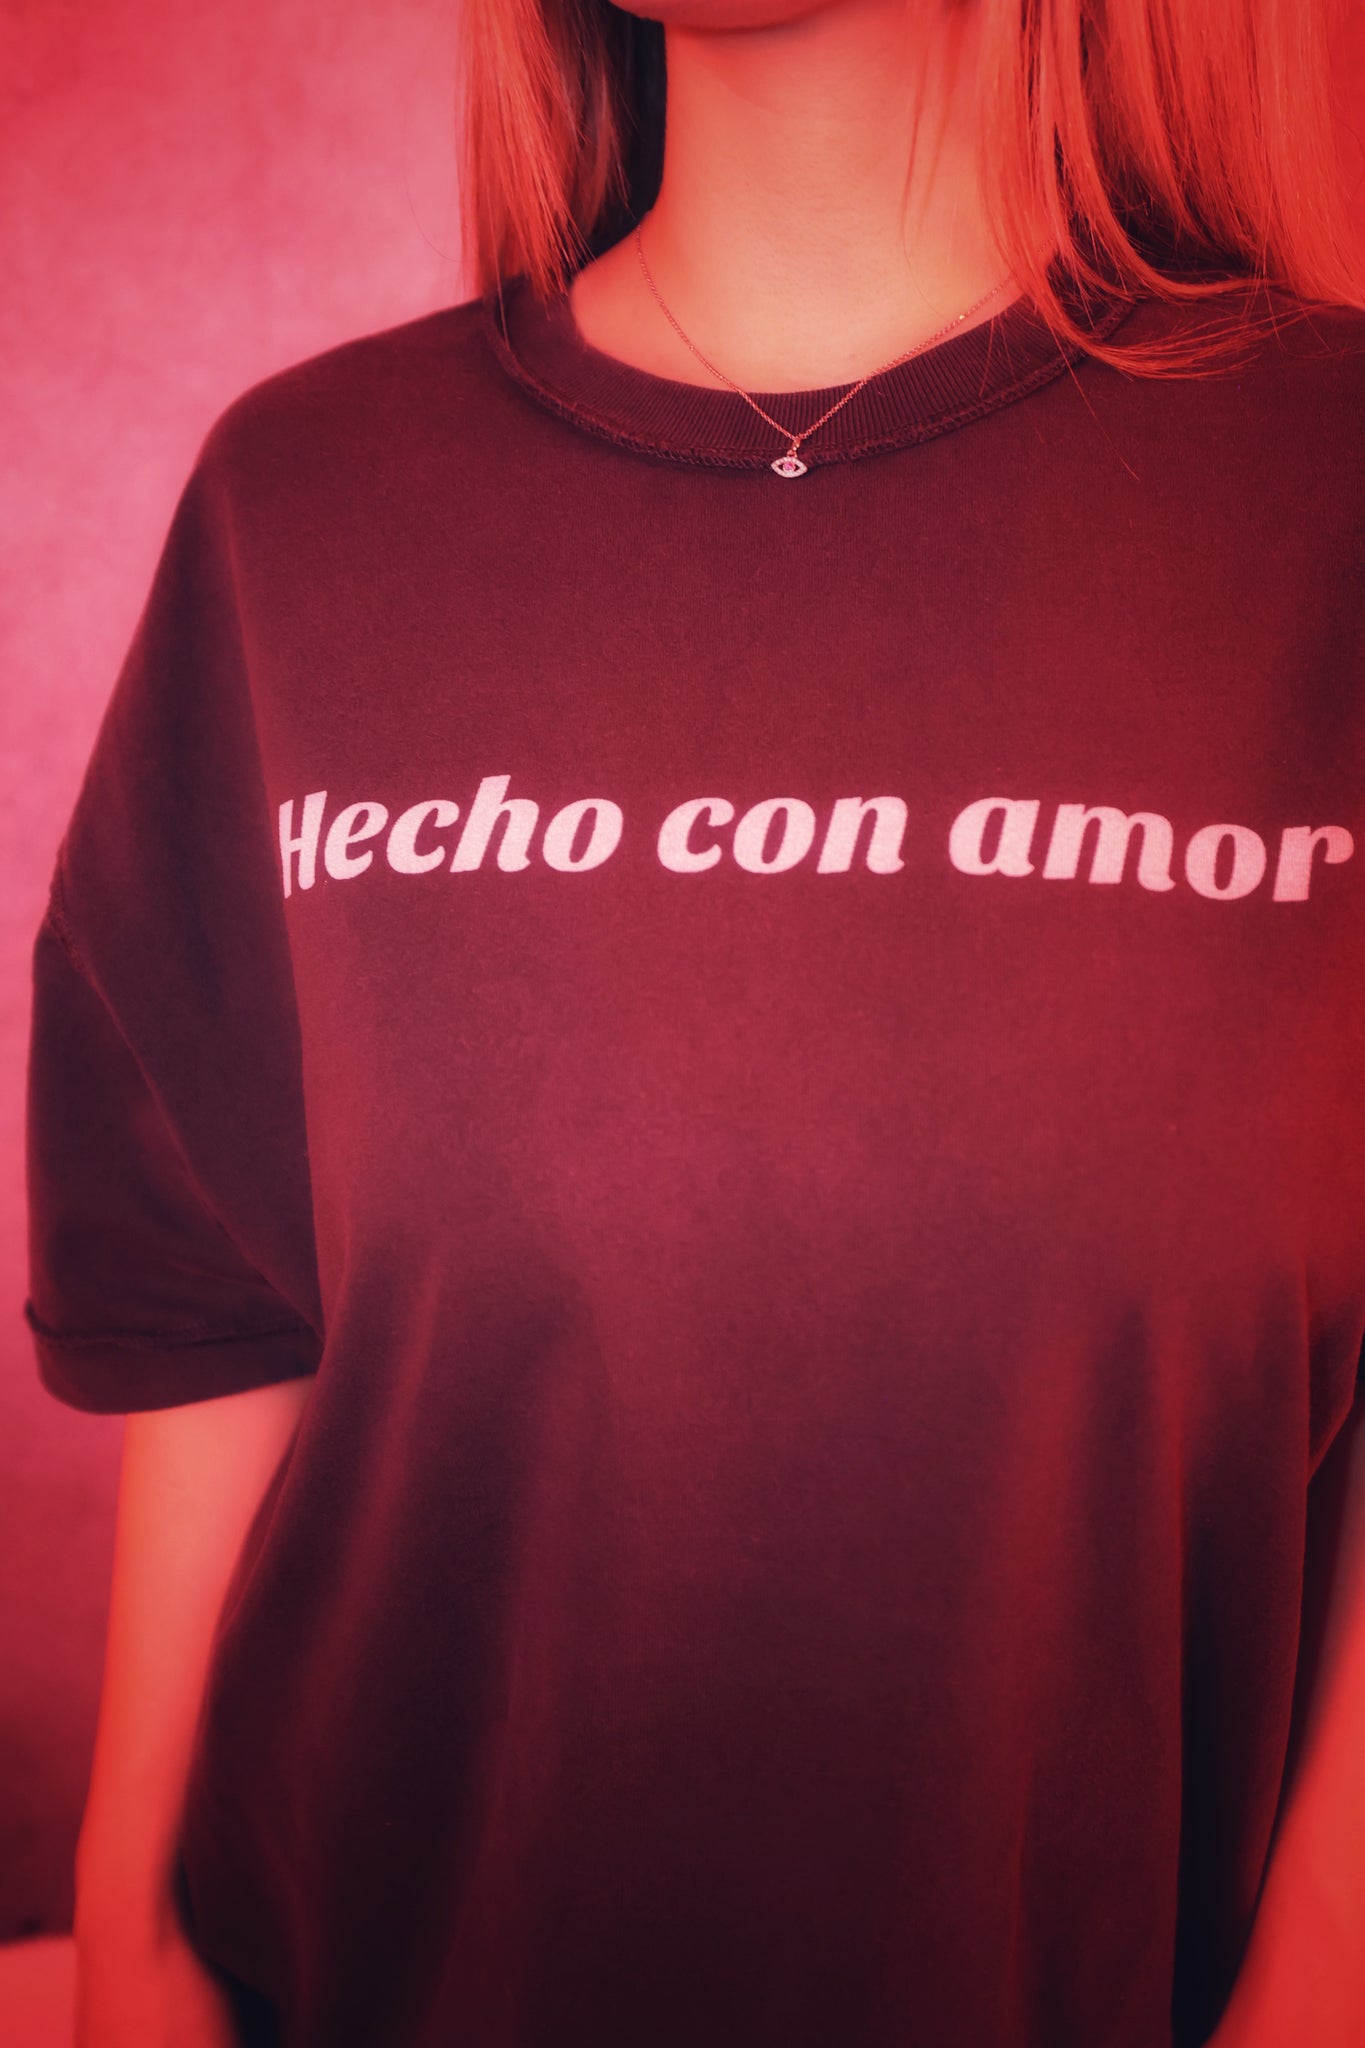 HECHO CON AMOR T-SHIRT